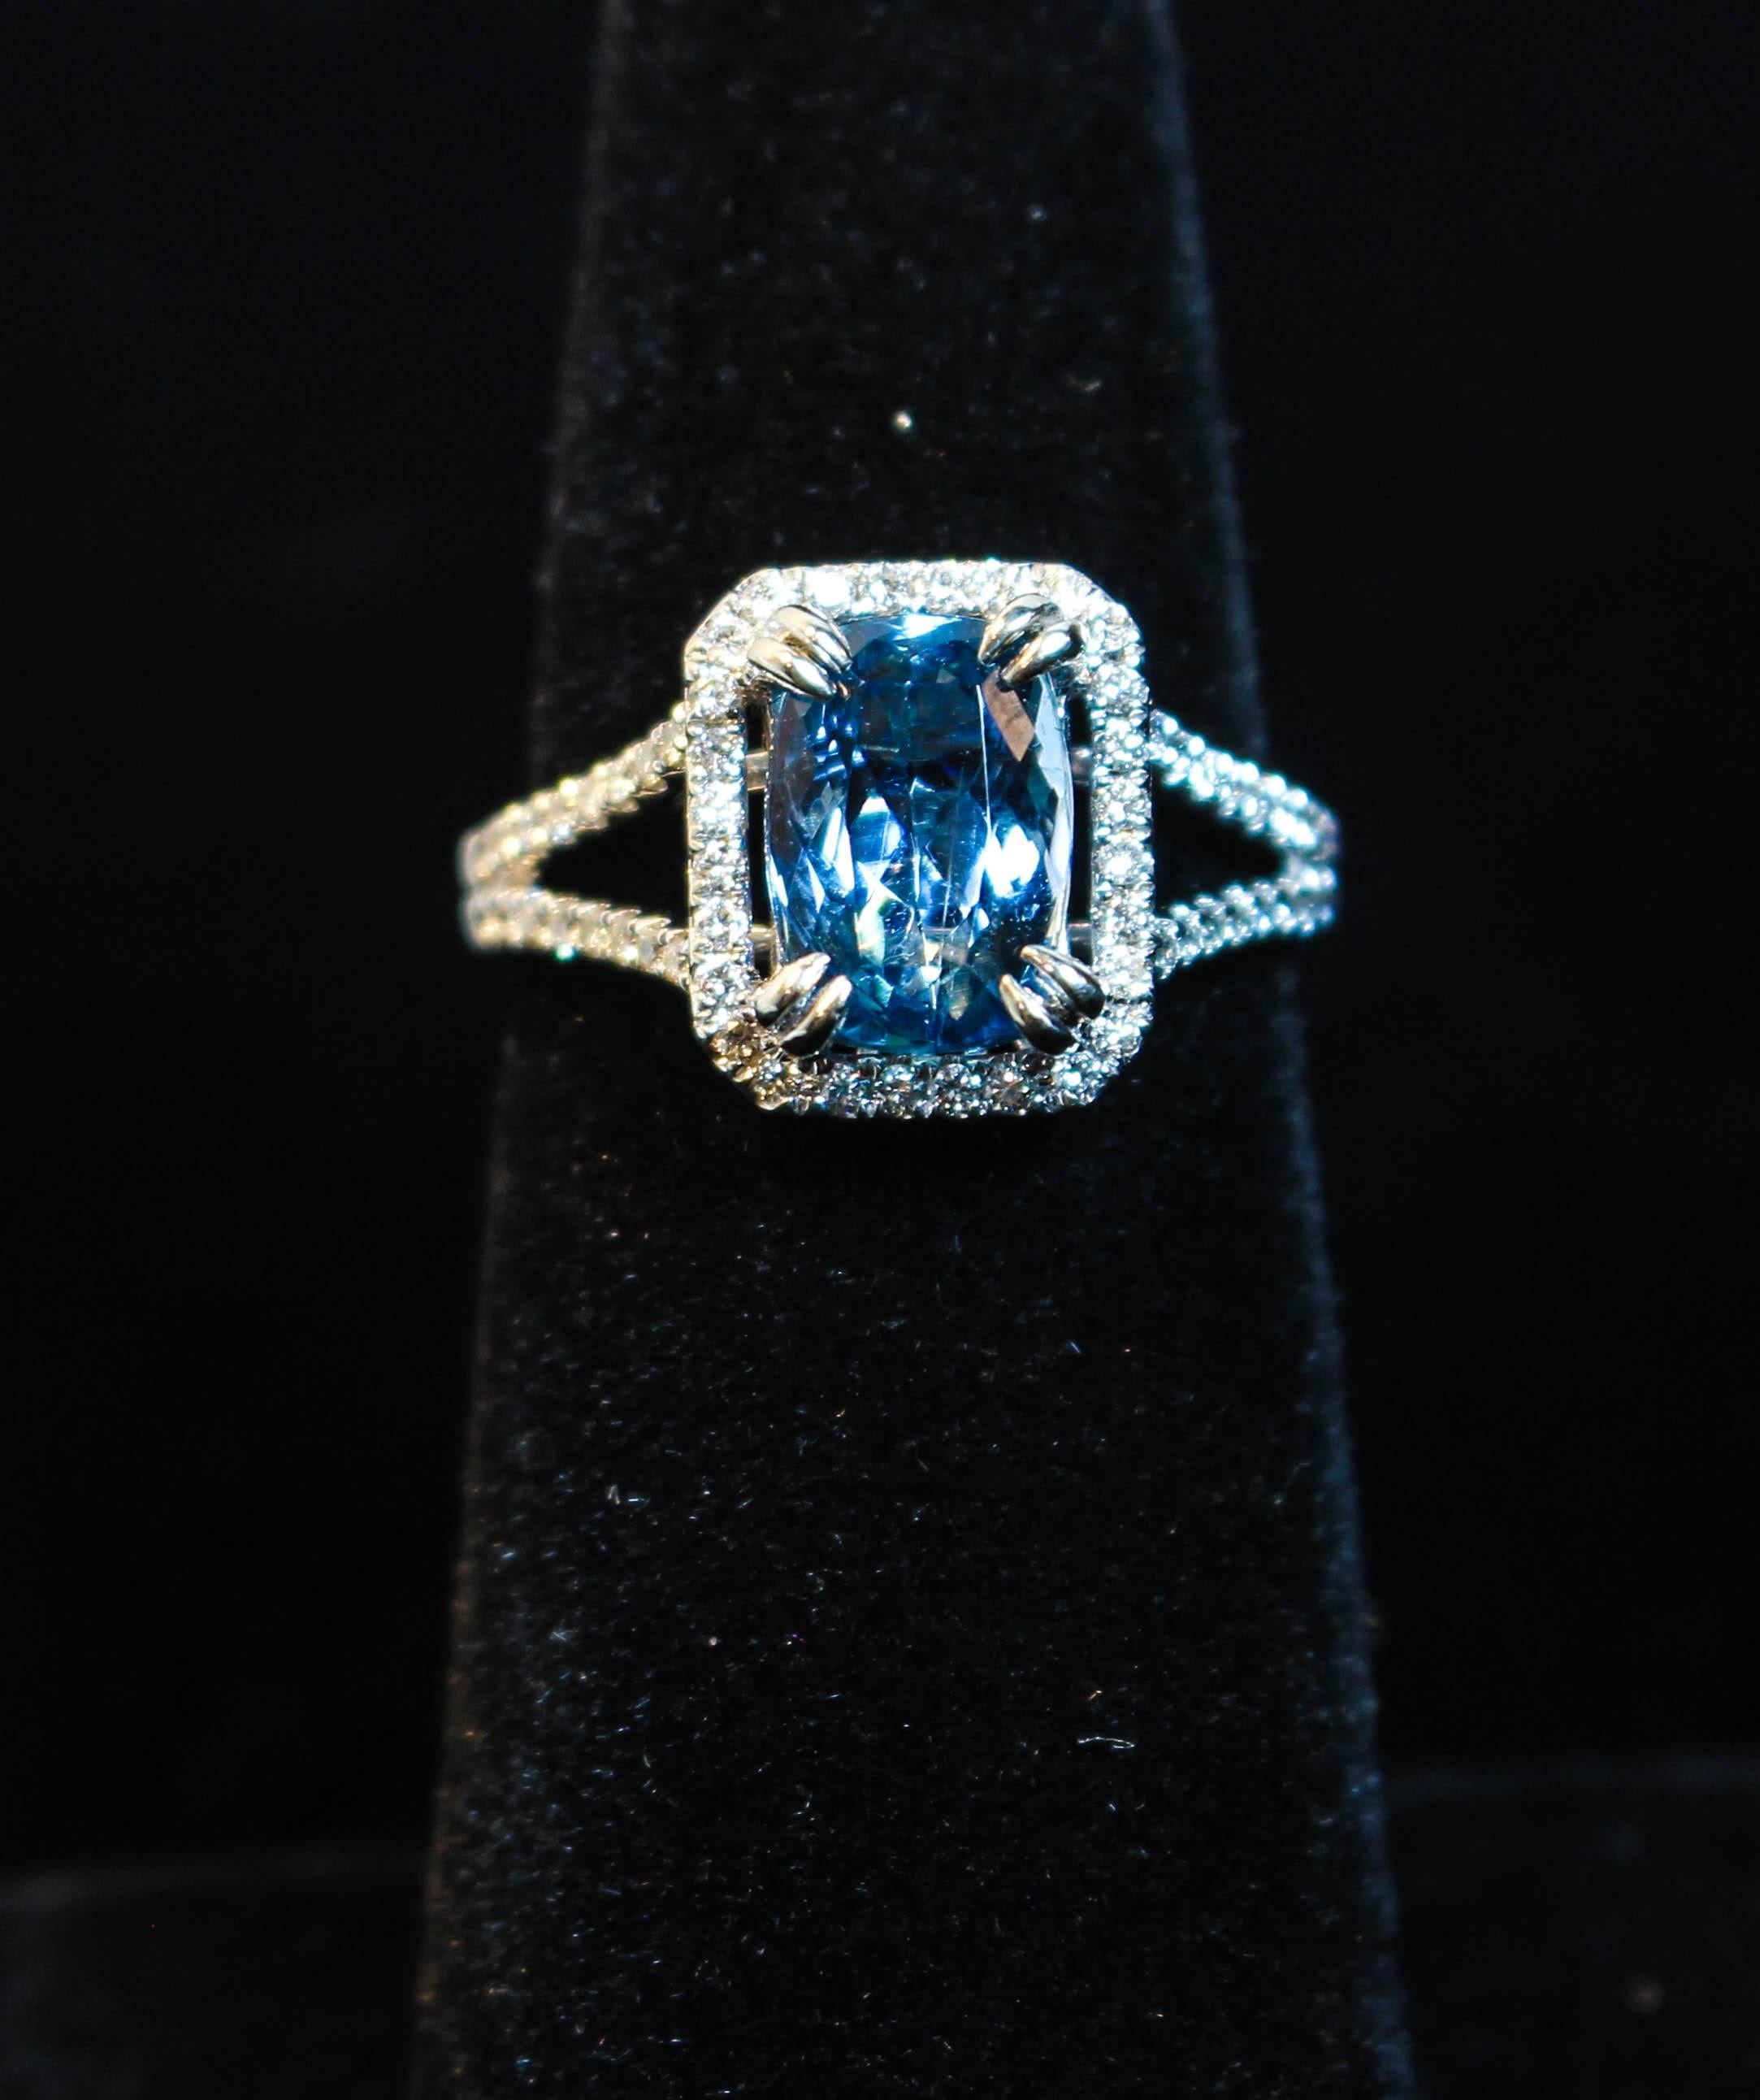 This ring is composed of 14KT white gold with a large Aquamarine center stone and pave diamond accneting. Specs below. In excellent condition.

Please feel free to ask any questions you may have, we are happy to assist. 

Specs:
14 KT White